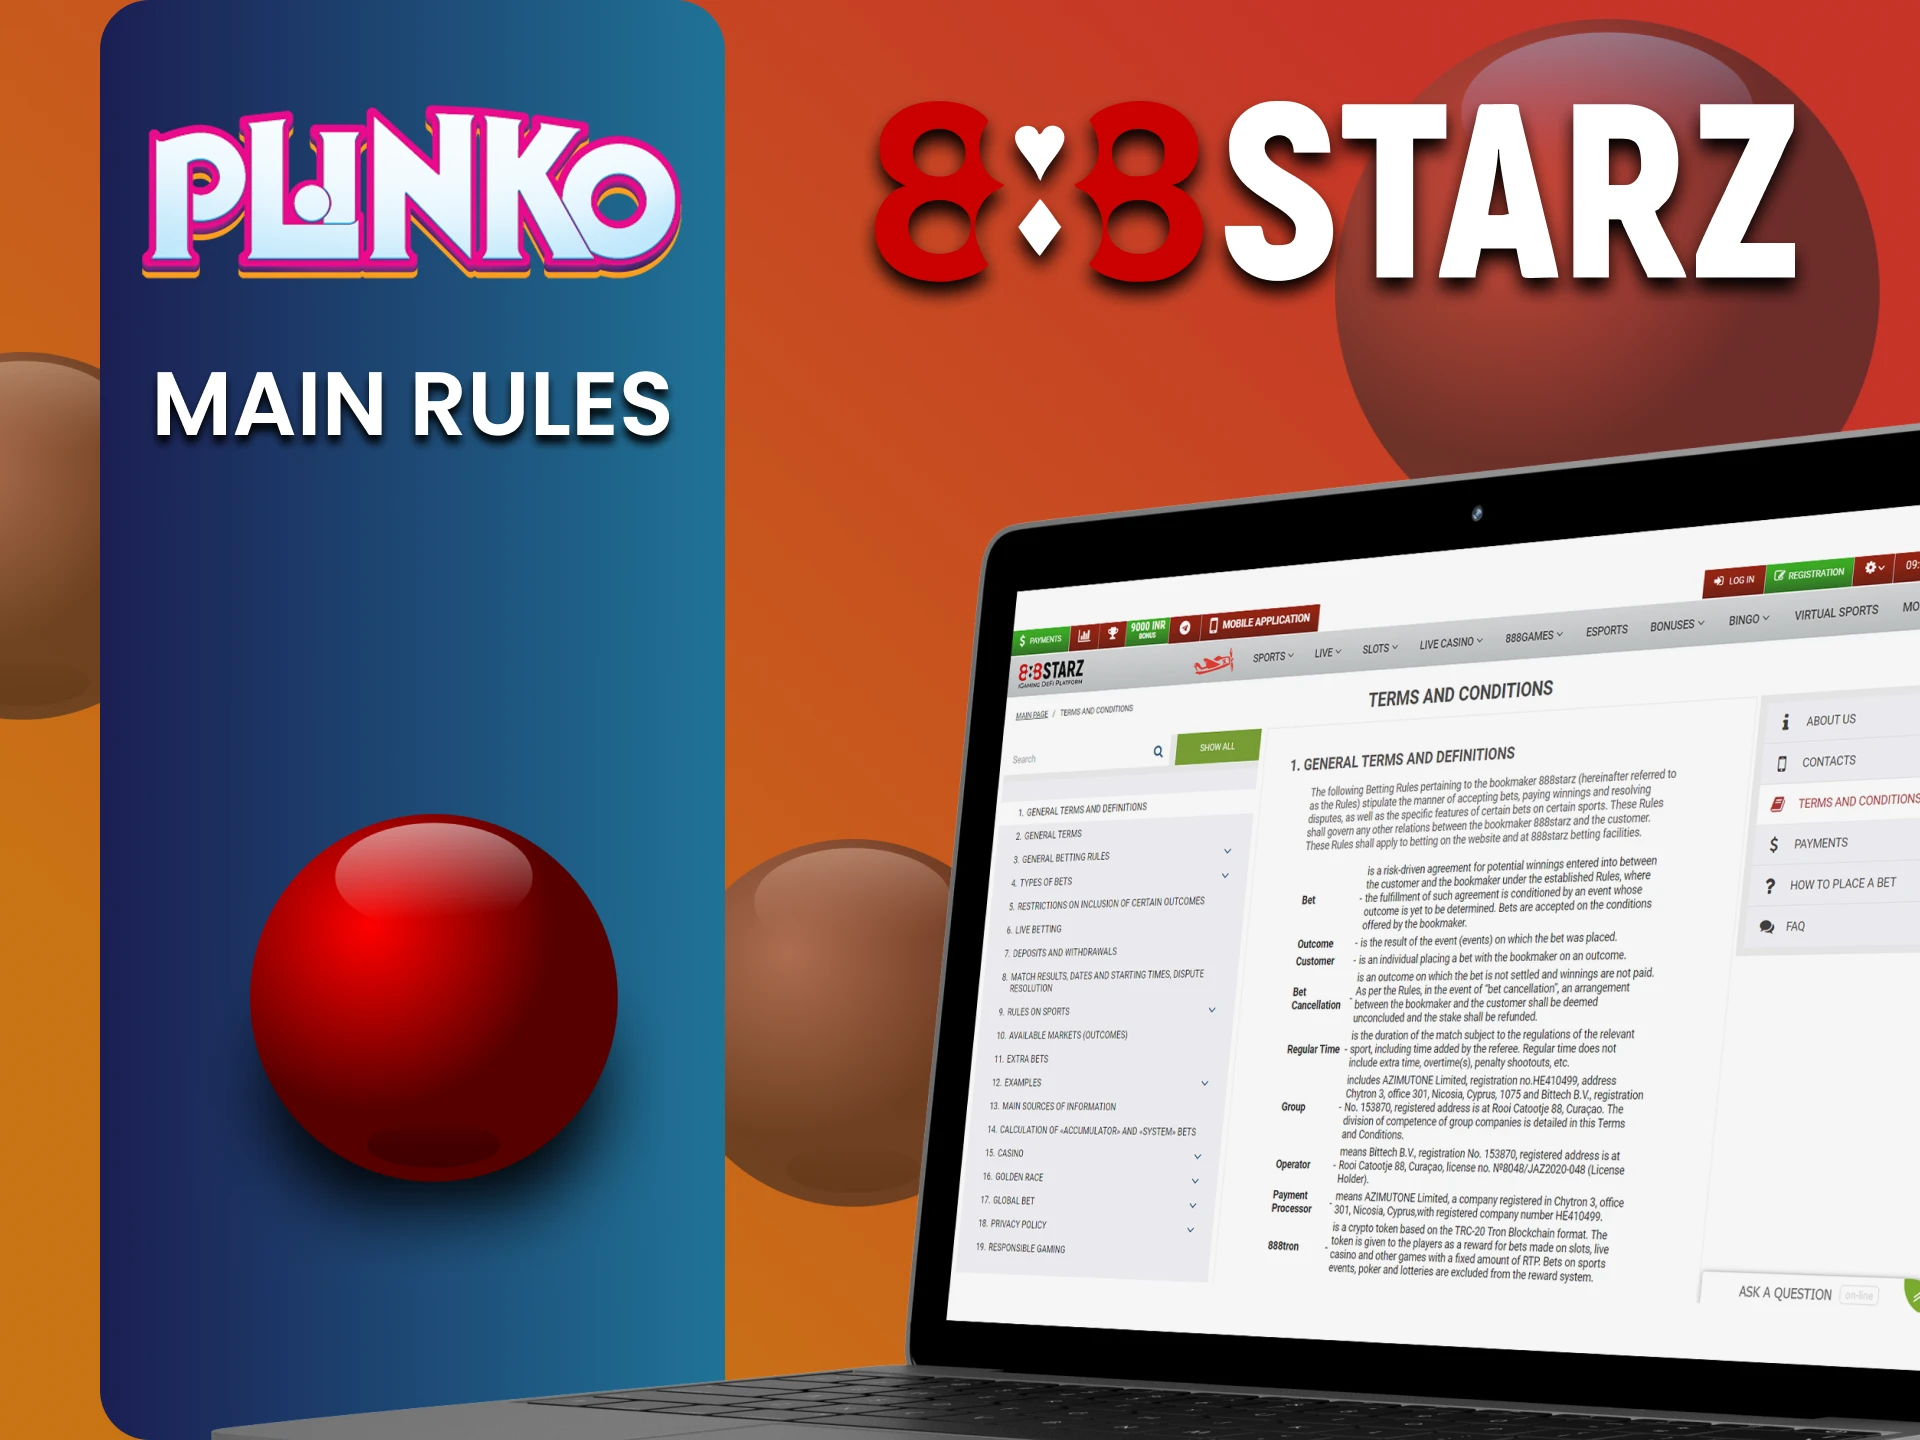 Learn the rules of the 888starz service for playing Plinko.